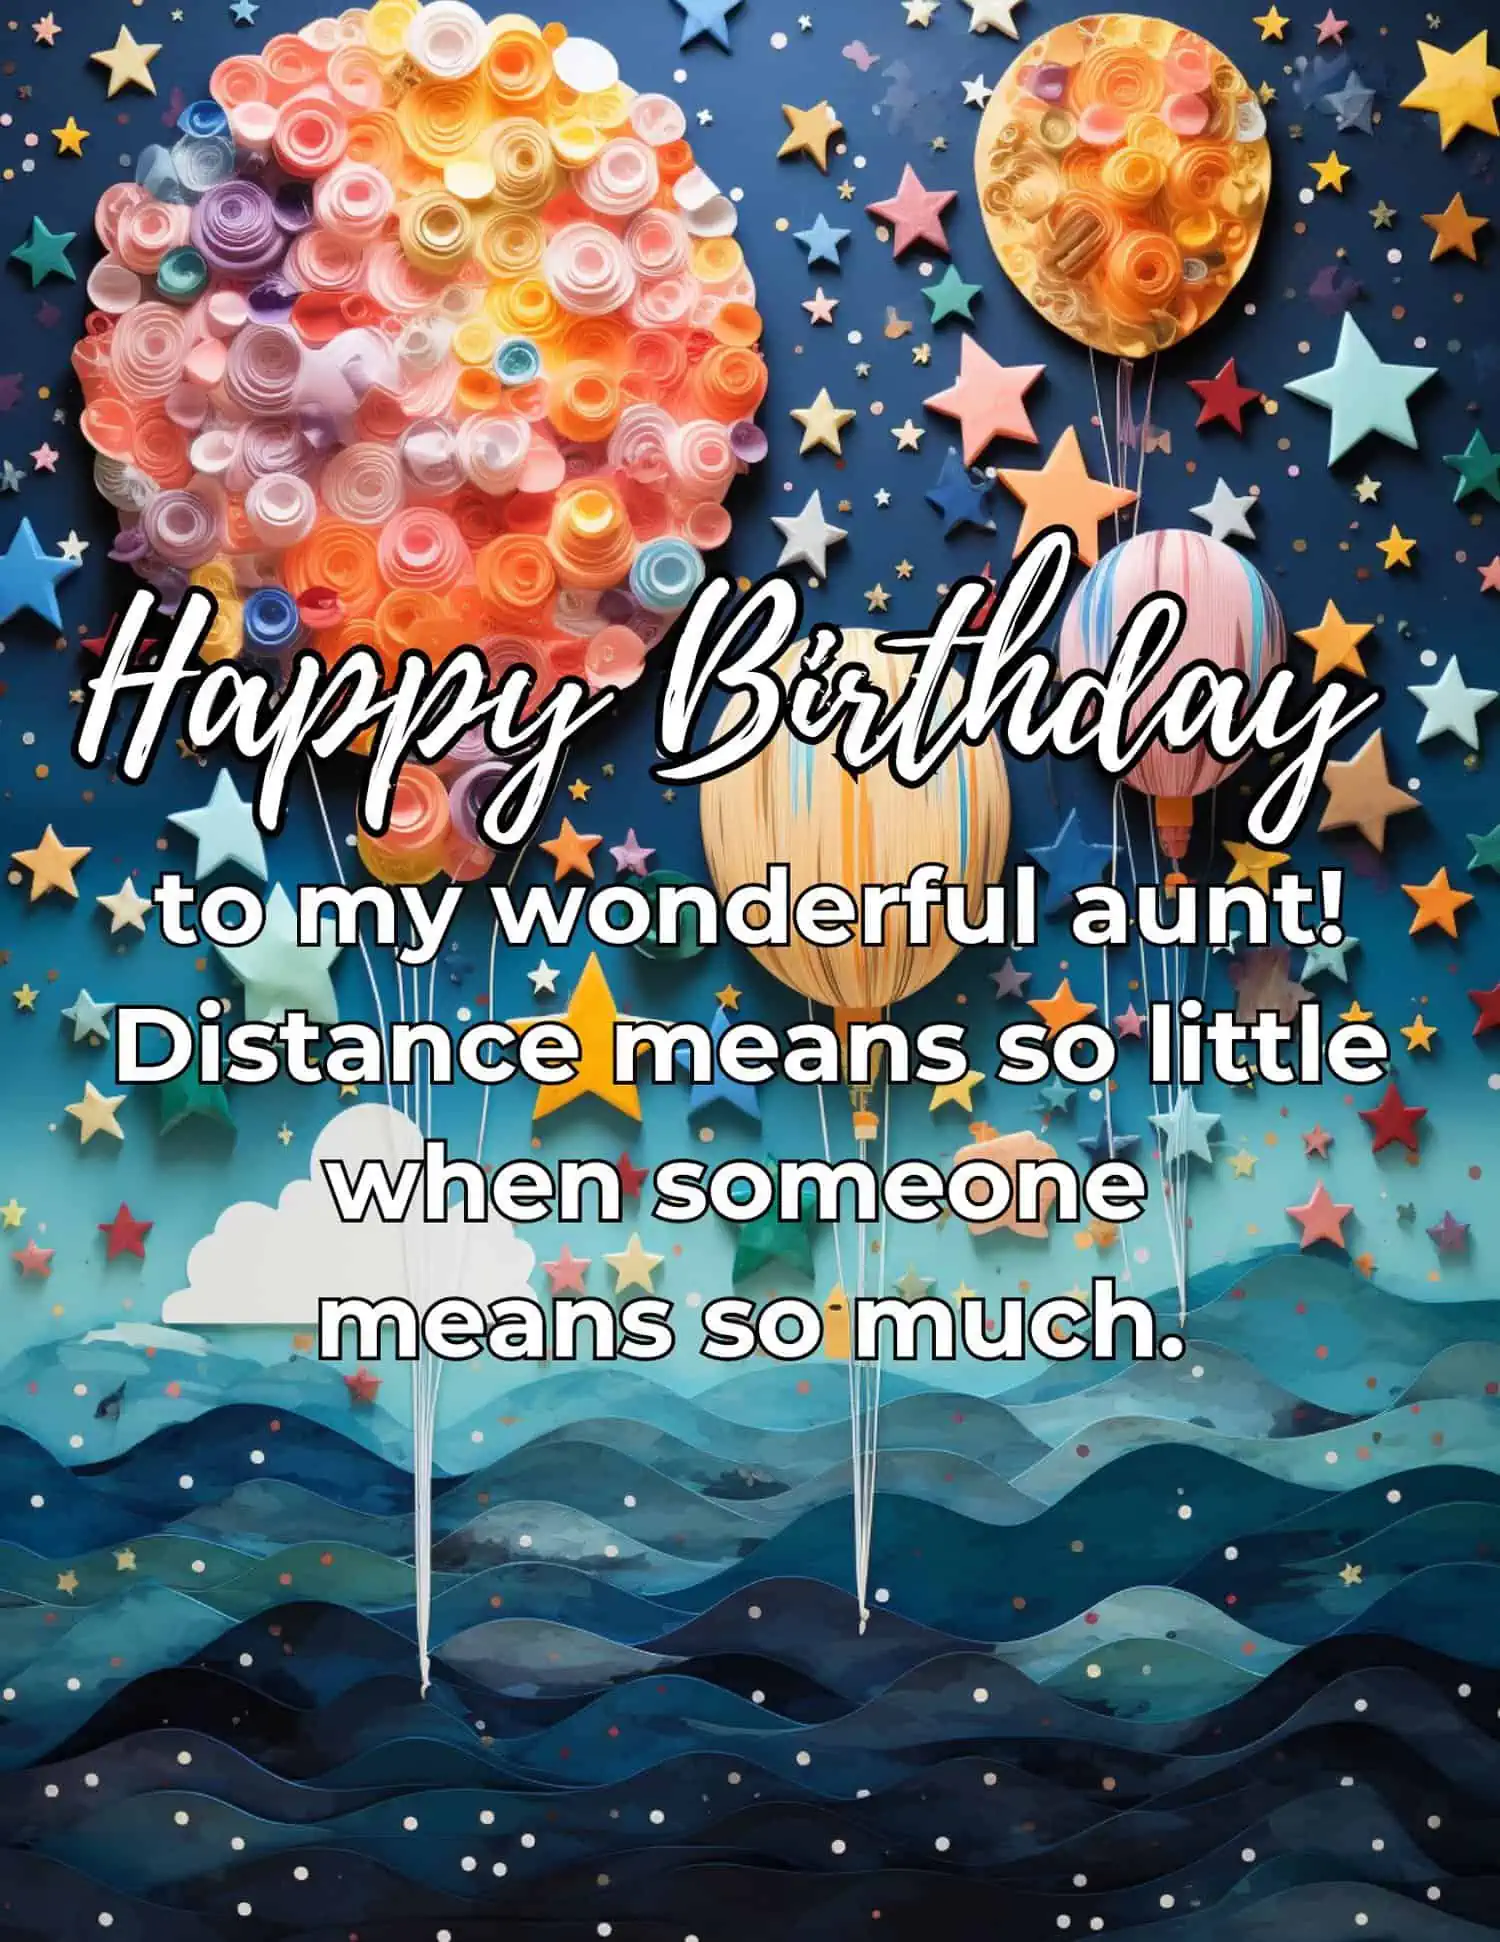 A collection of heartfelt birthday messages designed to connect and bring joy to aunts who are far away, emphasizing the enduring bond regardless of distance.